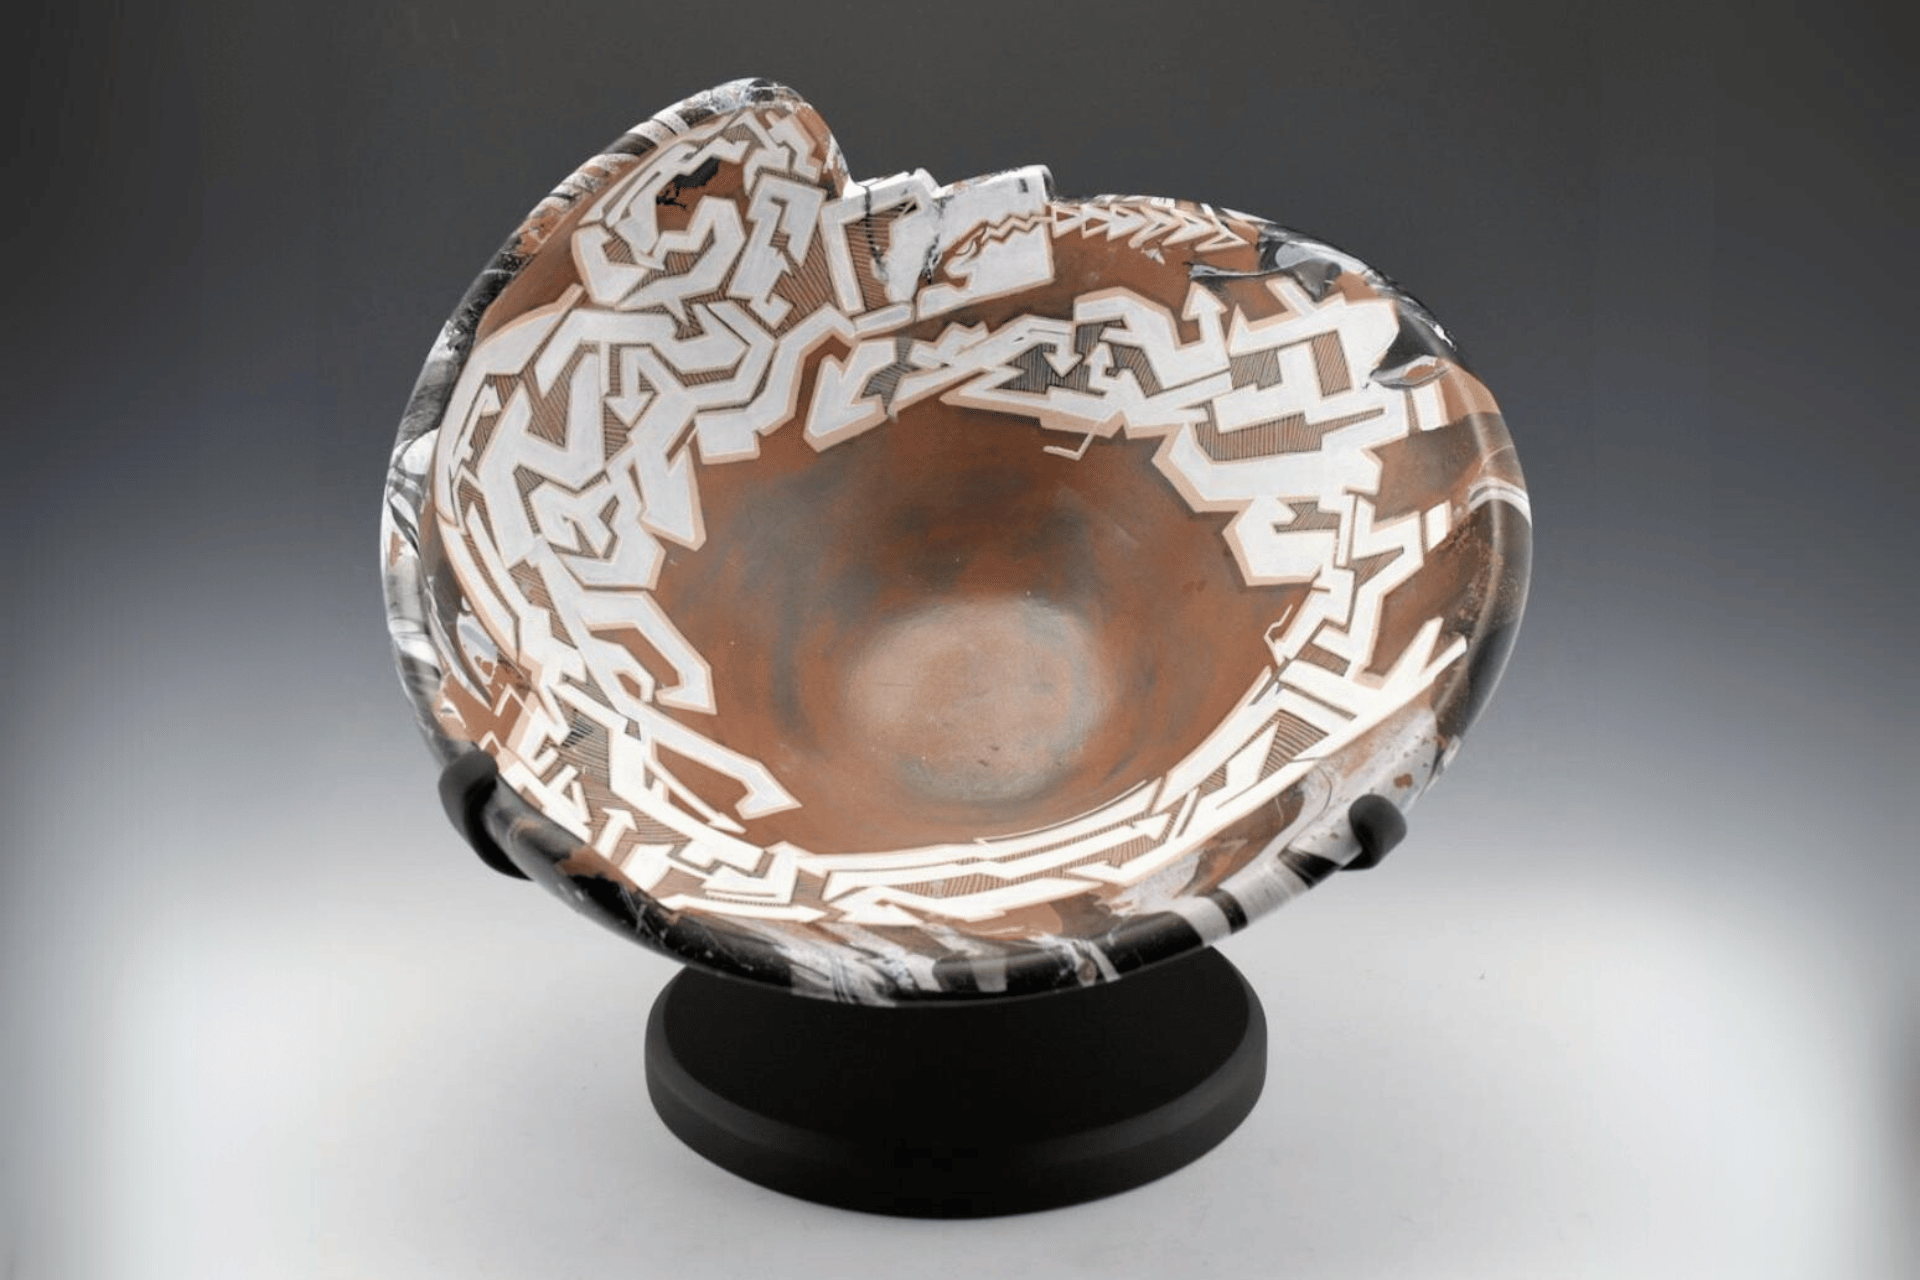 A ceramic bowl with intricate white geometric patterns on a brown and black background, displayed on a black stand.